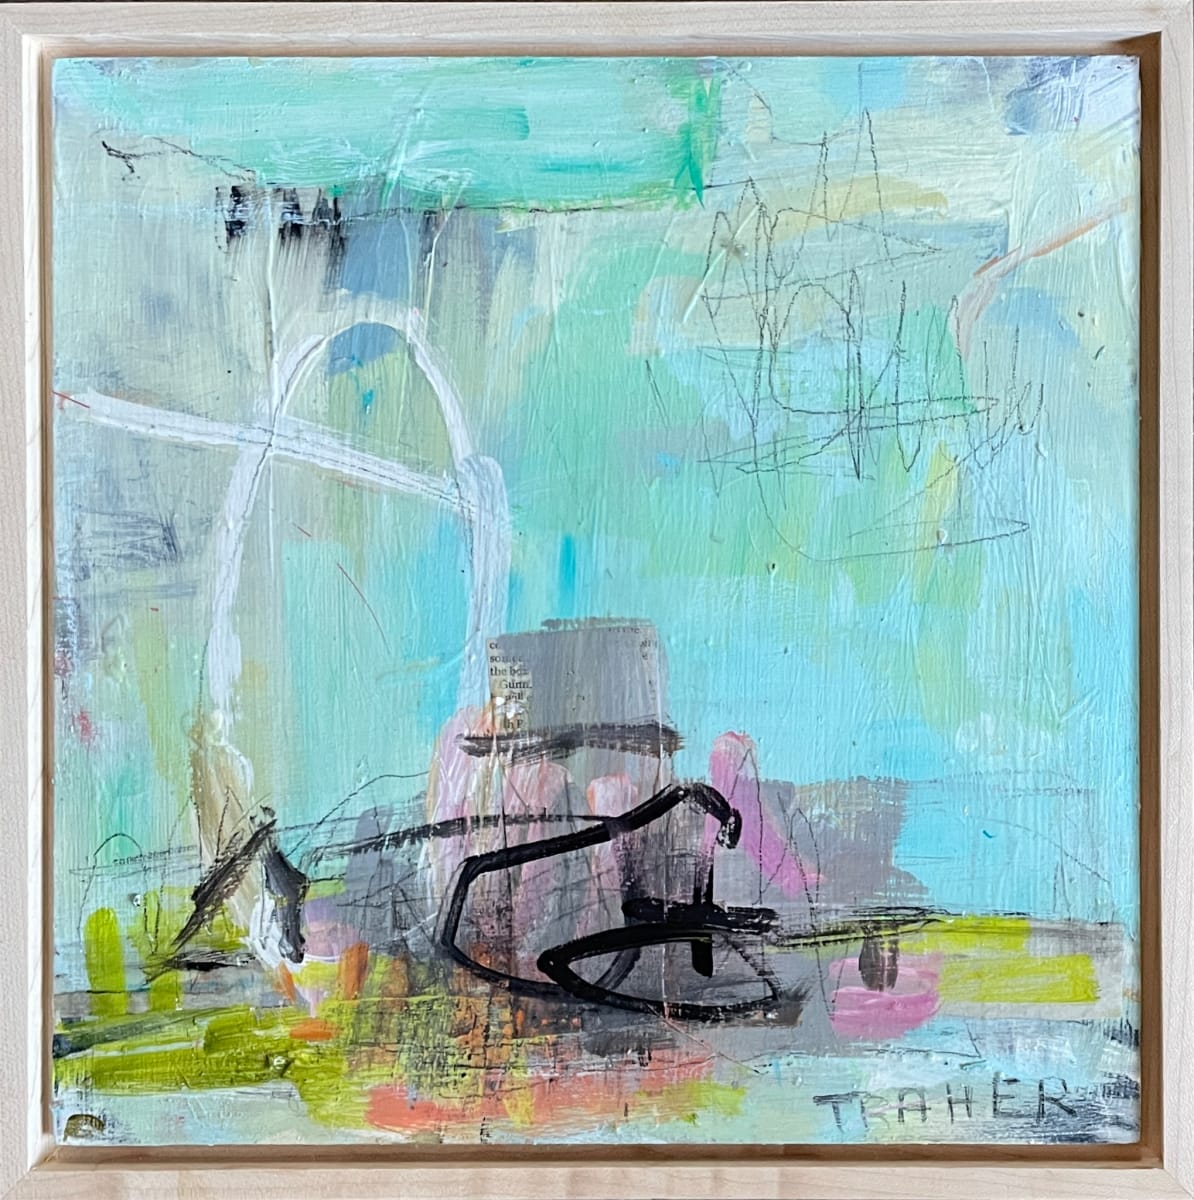 S2284 by Miriam Traher  Image: Bring life to your walls, creating your SQUARE FOOT gallery. All pieces are 12 "x 12", excluding the frame and can be mixed and mingled to create your unique expression in your home. A grouped exhibition makes a visual architectural and sculptural work dynamic and fluid as your tastes change. The size remains the same, and the frame remains the same.  Build on it, rearrange it and express your unique taste and style. Need to spice up a space? Change the pieces, move them to a new location, mix their order, buy a new one, and create a new wall of awesomeness. Created on birch rigid wood board and set in a 1.5" beautiful maple frame. Neutral and modern. Check back often for new and exciting additions to add to your wall of awesomeness.p